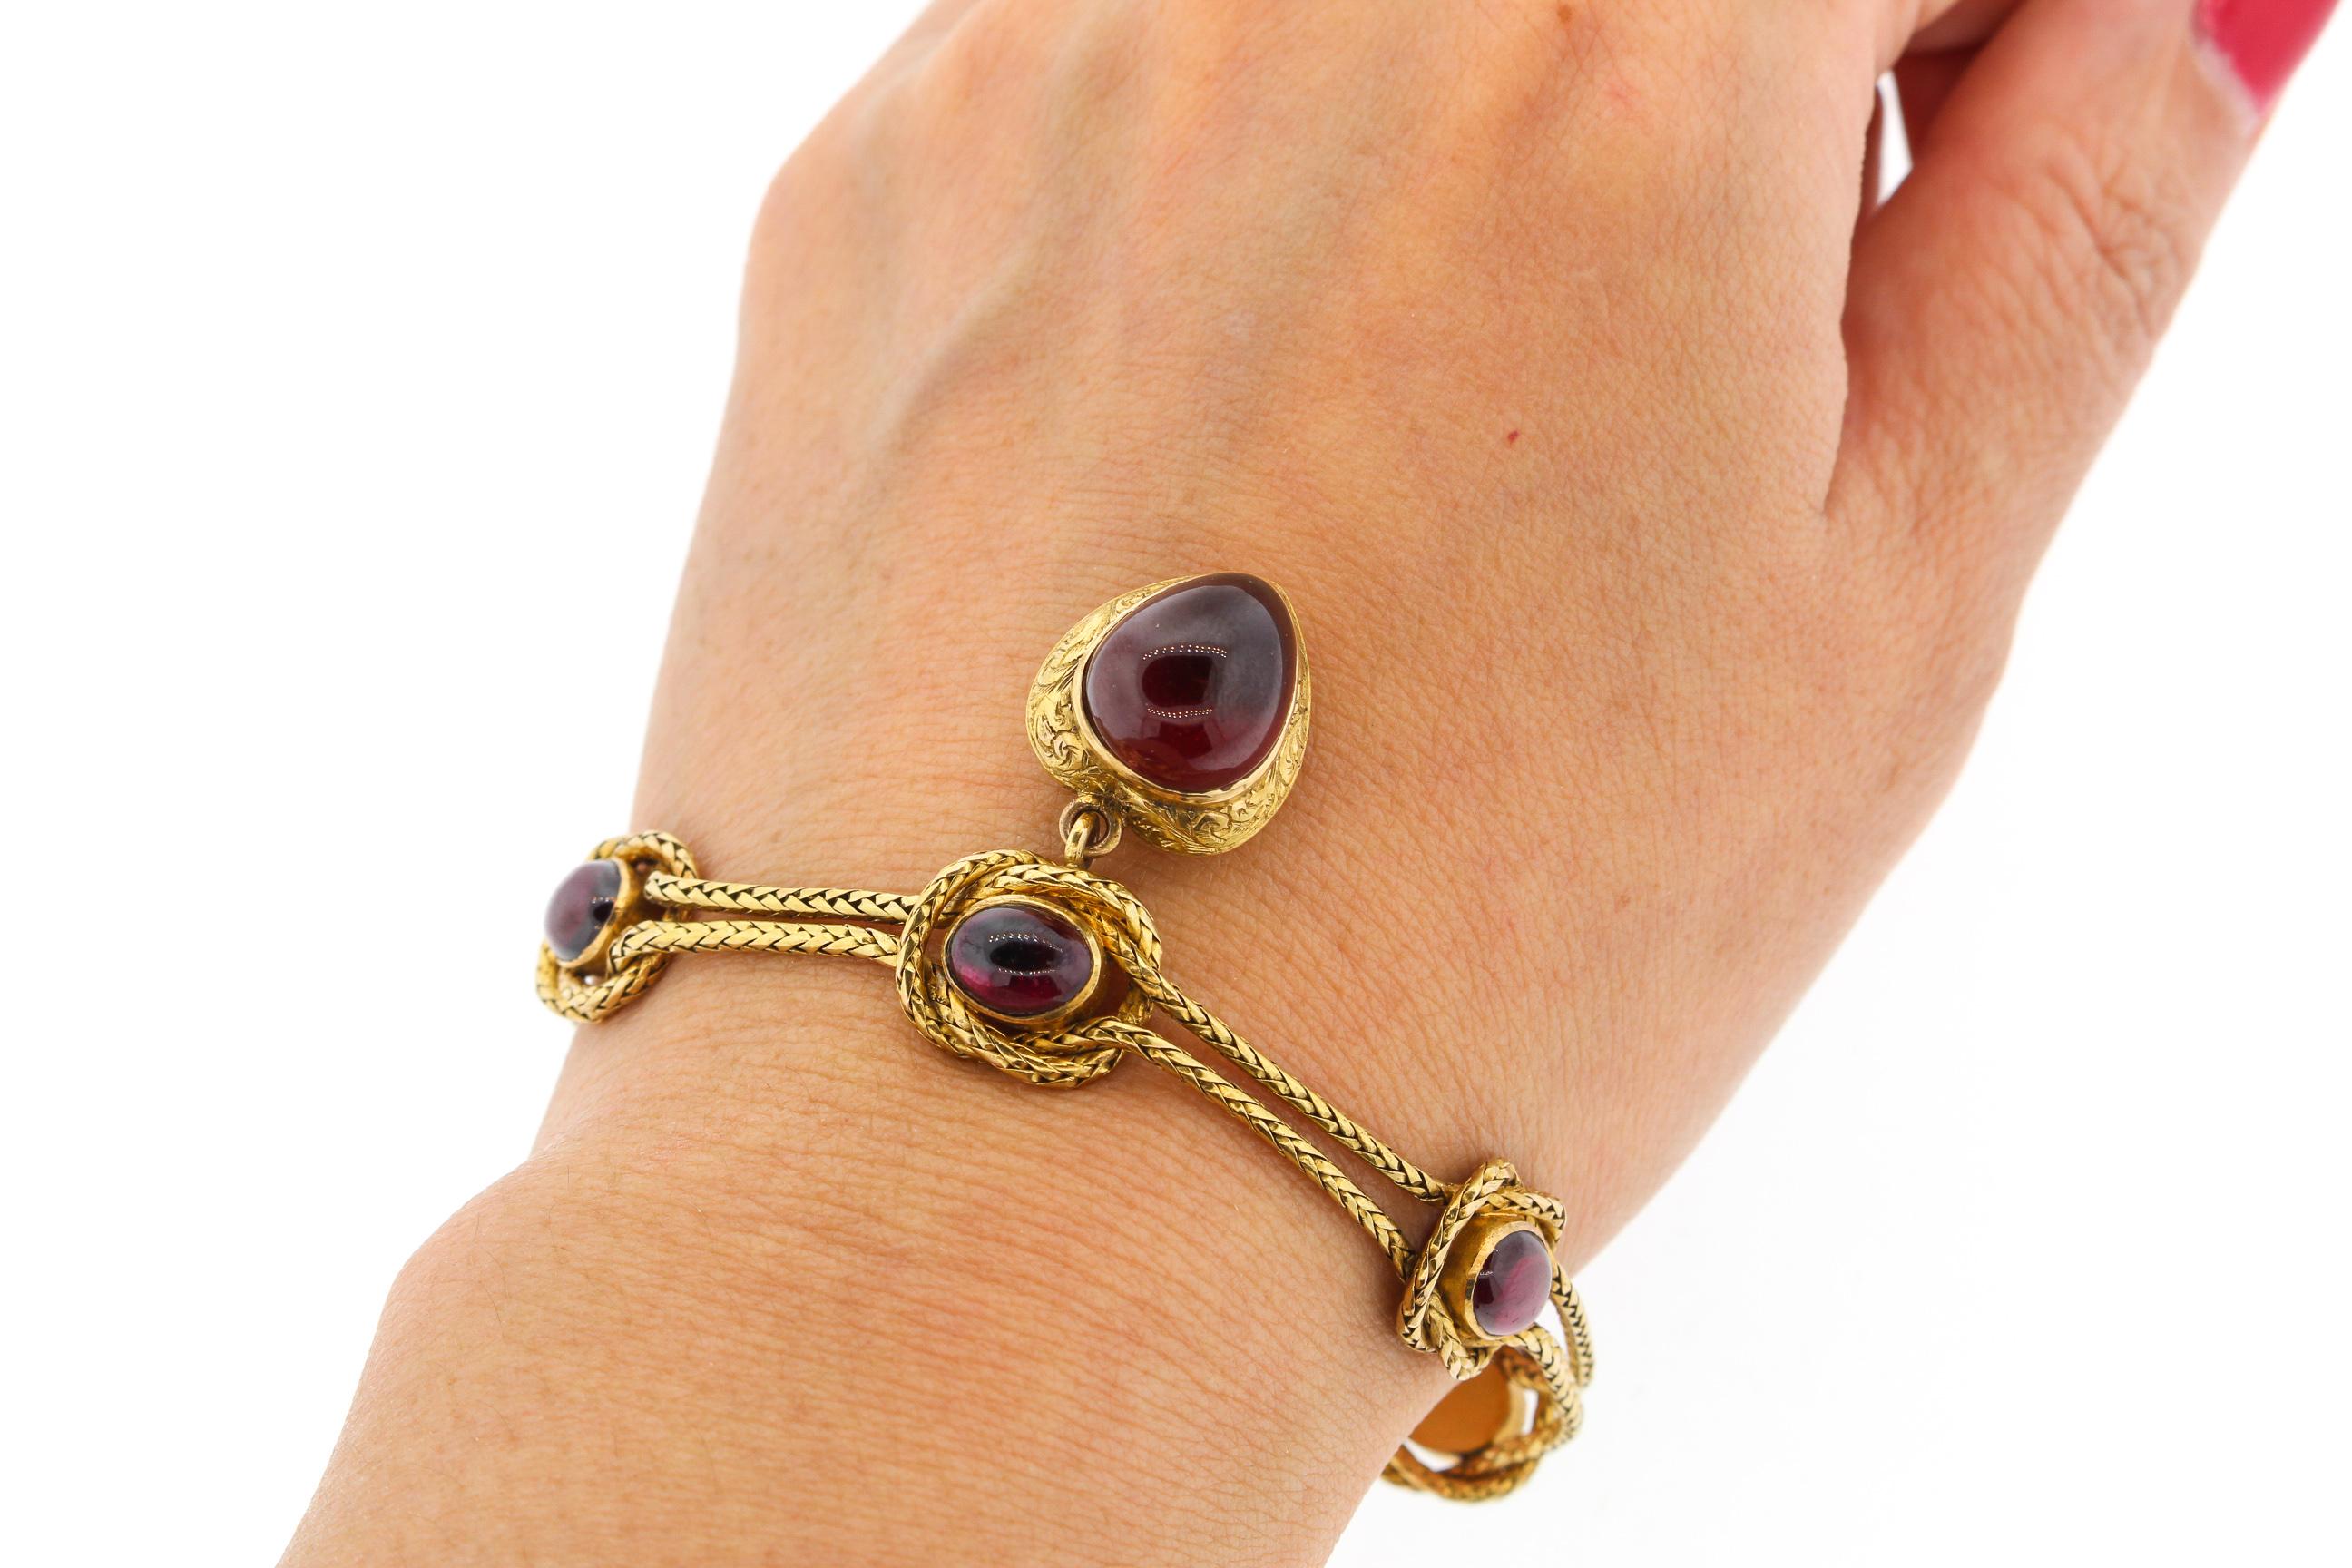 Antique mid-Victorian braided gold bracelet set with red carbuncle garnets and suspending a heart shaped locket, circa 1860. The gold bracelet knots around the oval shaped garnets in a delightful pattern. The large cabochon garnet in the heart is a